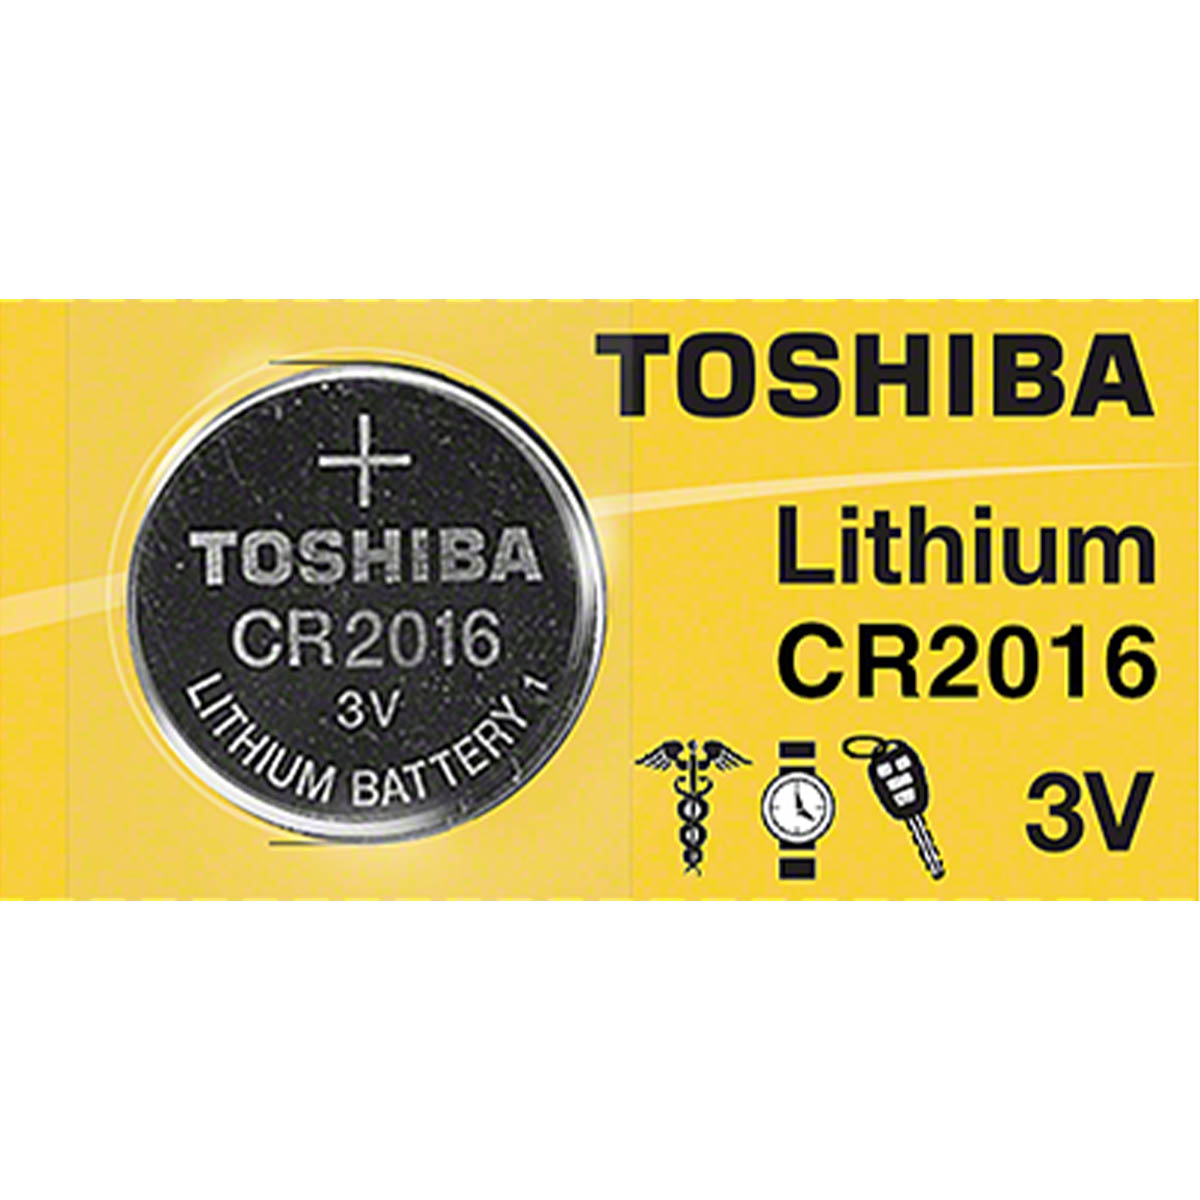 Murata CR2016 3V Lithium Coin Cell (5 Batteries) - Replaces Sony CR2016